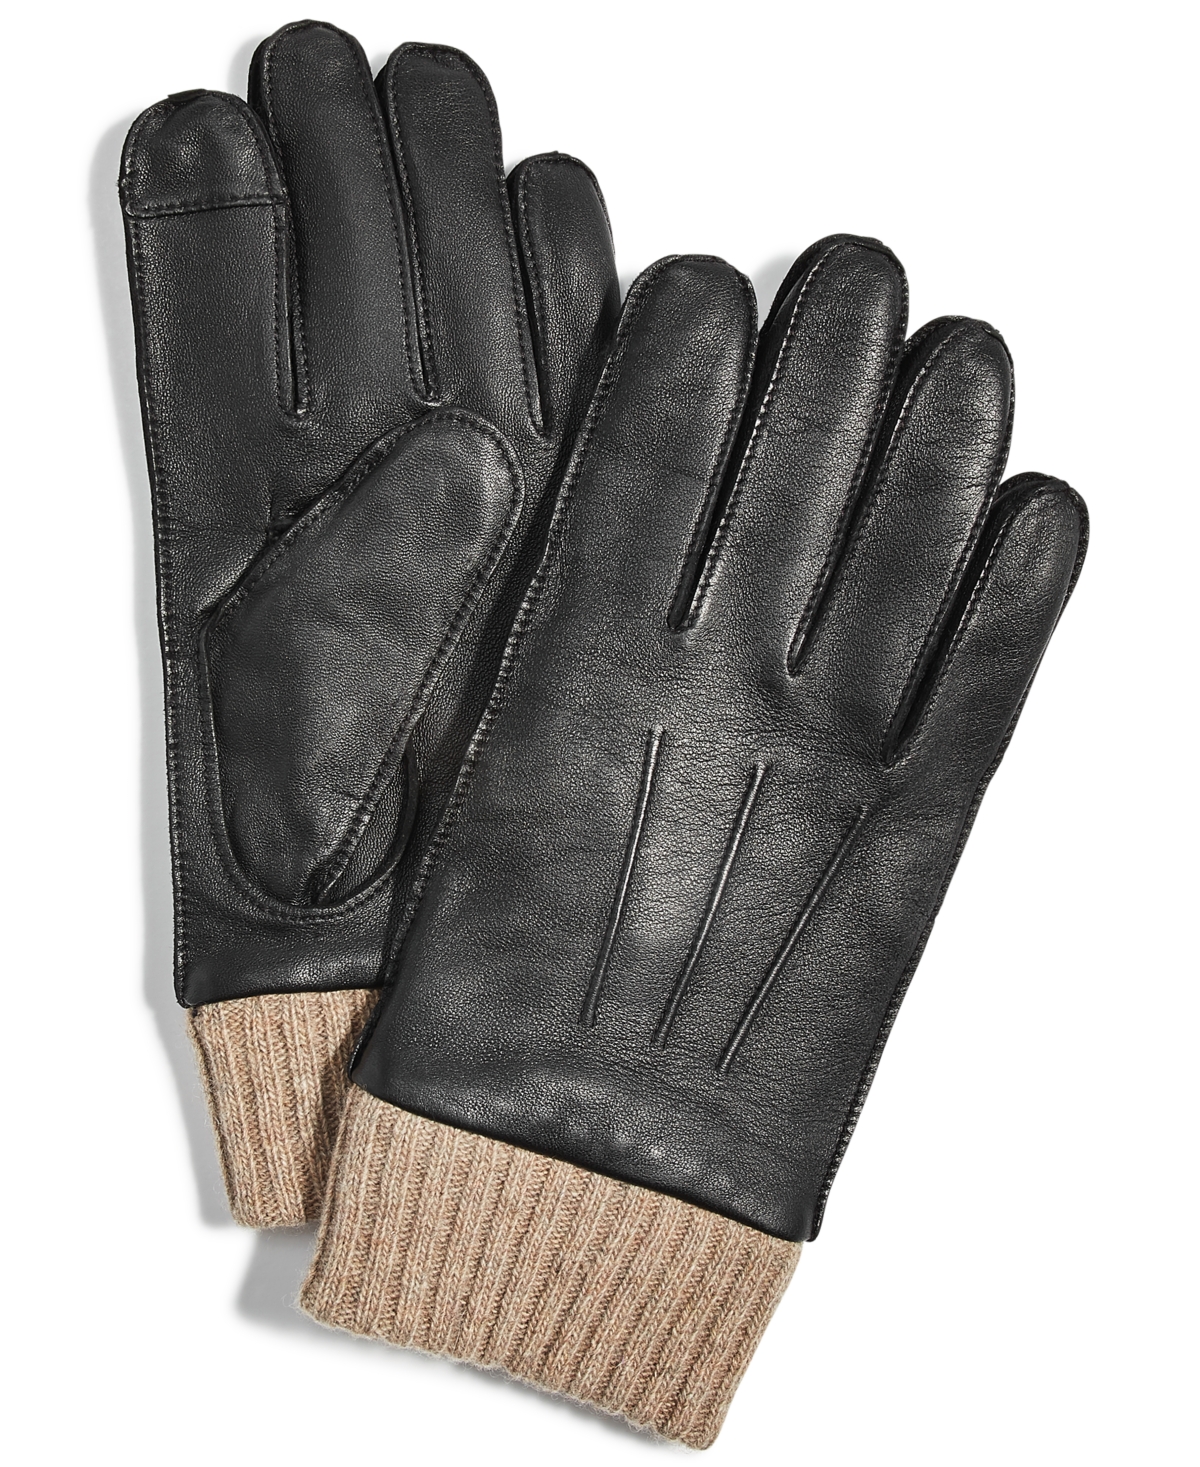 Men's Cashmere Gloves, Created for Macy's - Black